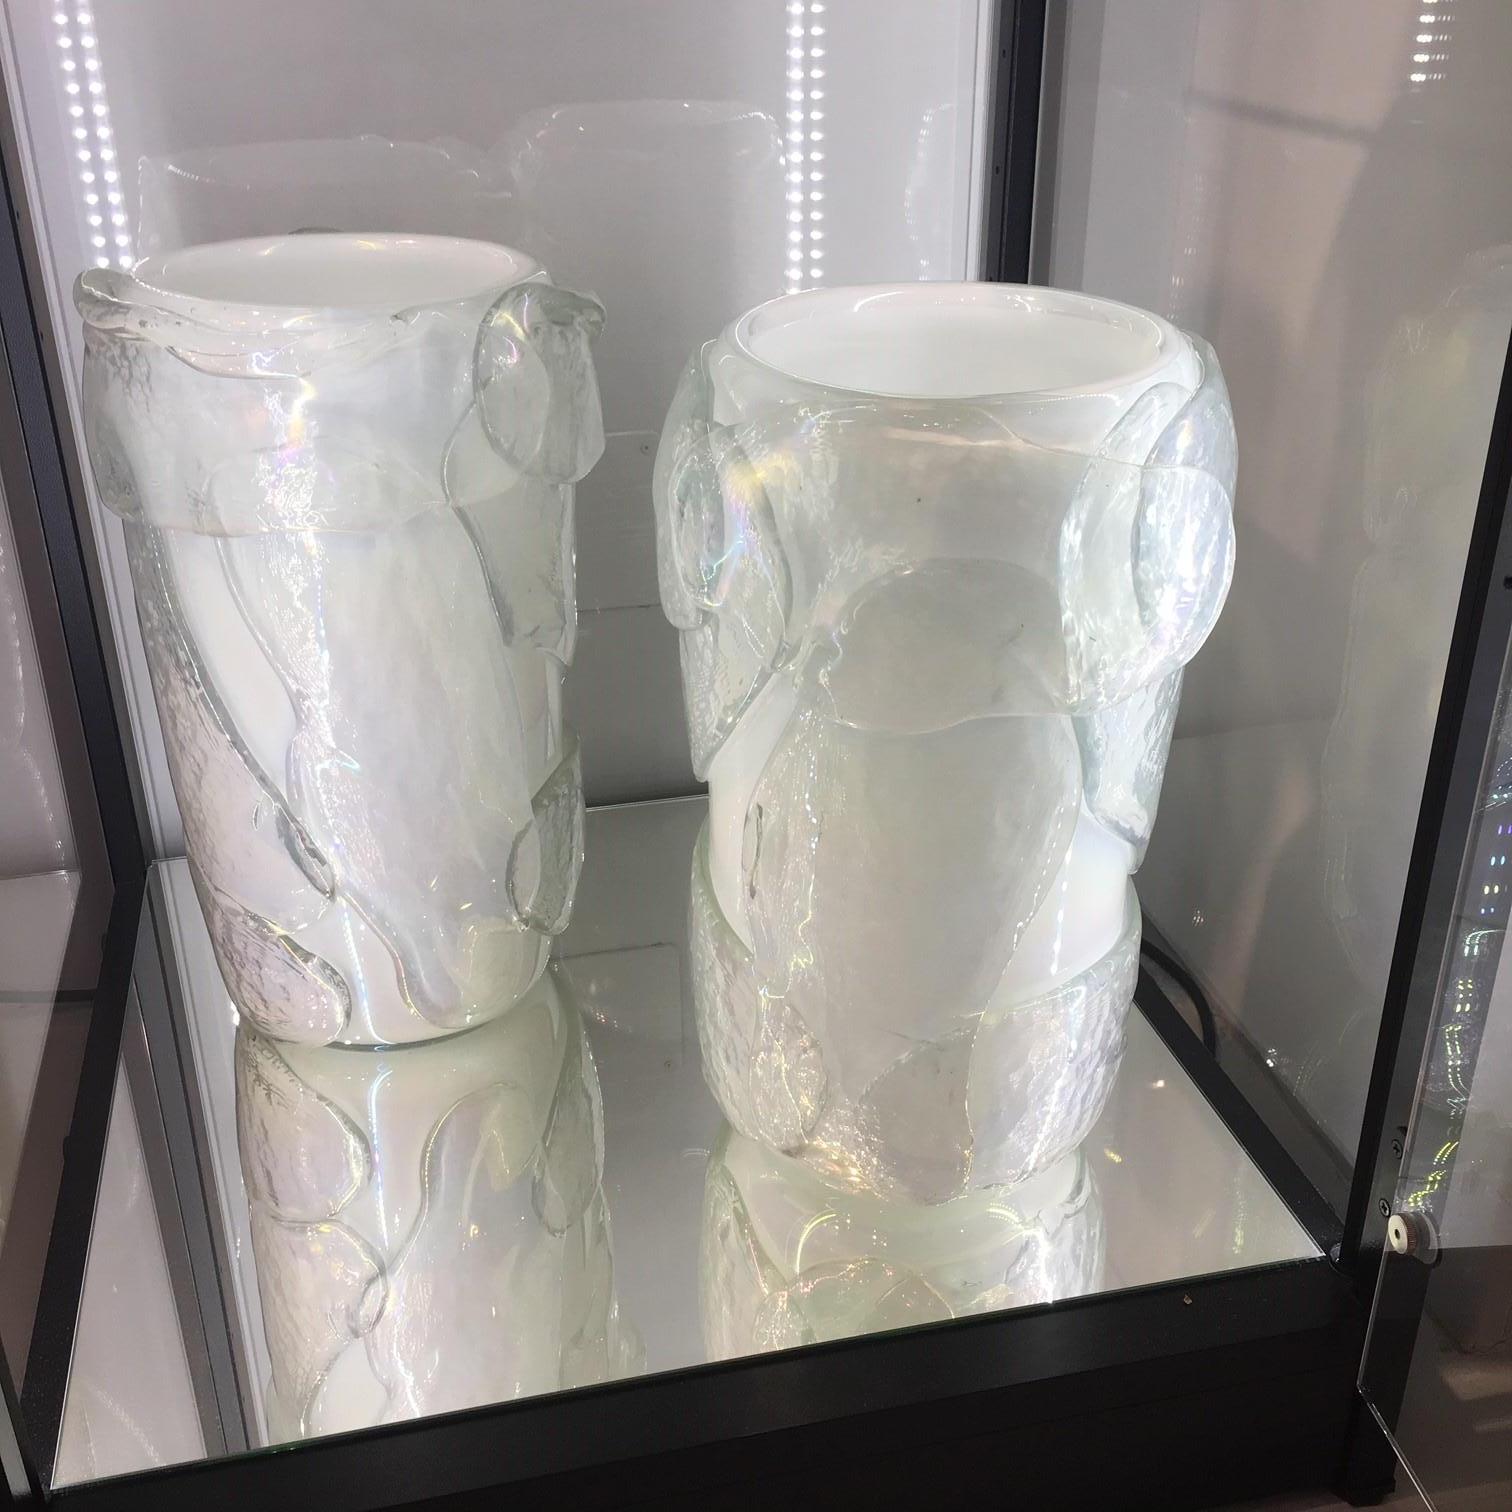 Late 20th Century Pair of Huge Murano Glass Vases White-Iridescent Colored with Surreal Impression